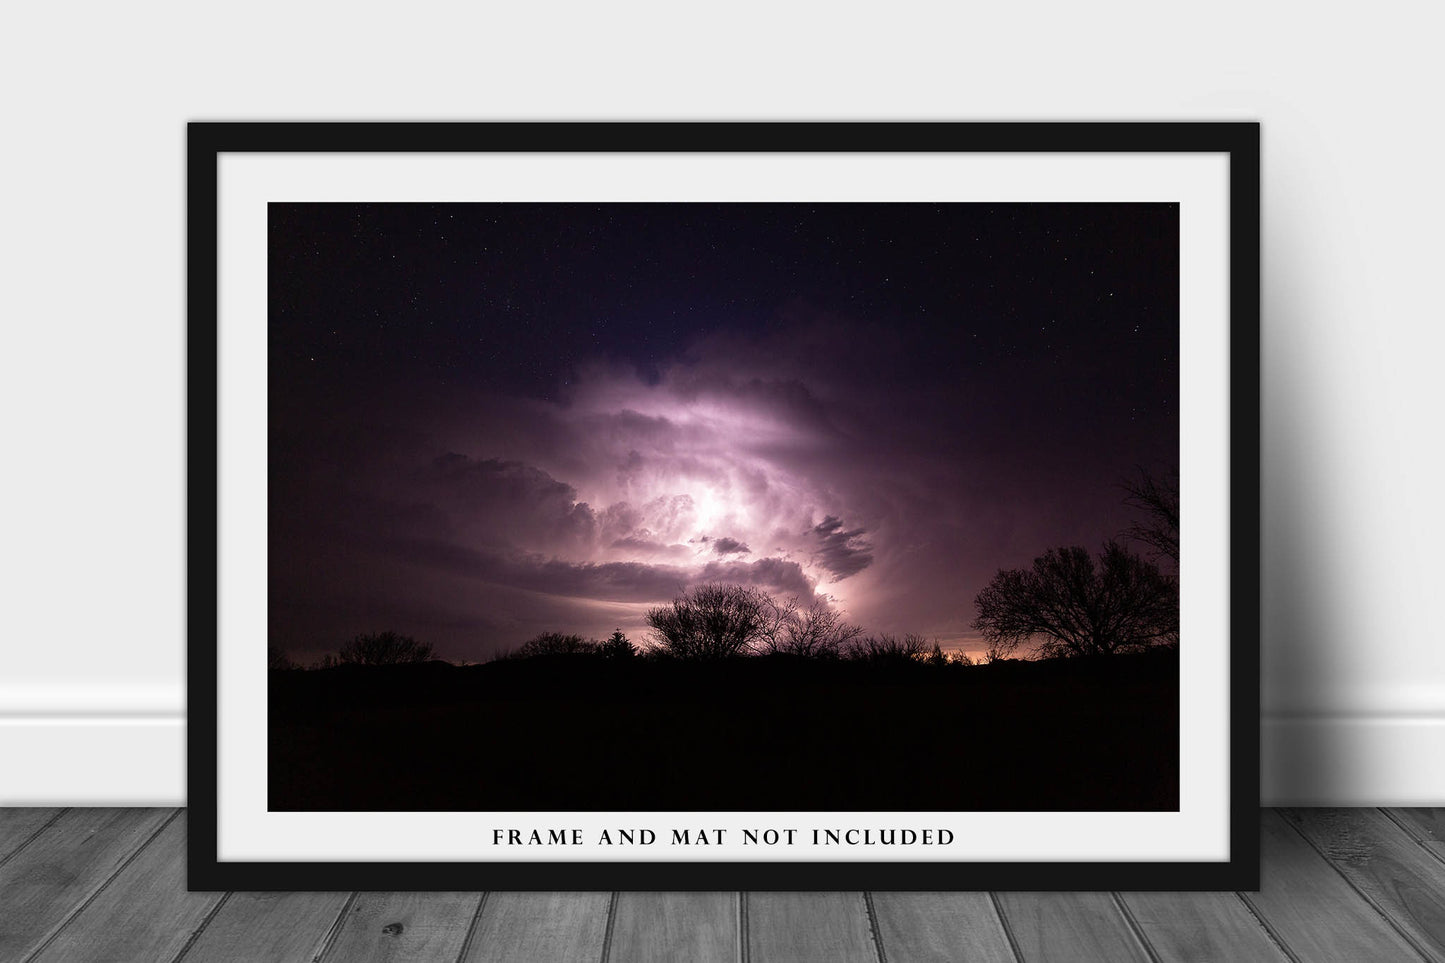 Thunderstorm Photography Print - Picture of Storm Cloud Illuminated by Lightning at Night in Oklahoma - Weather Photo Artwork Decor